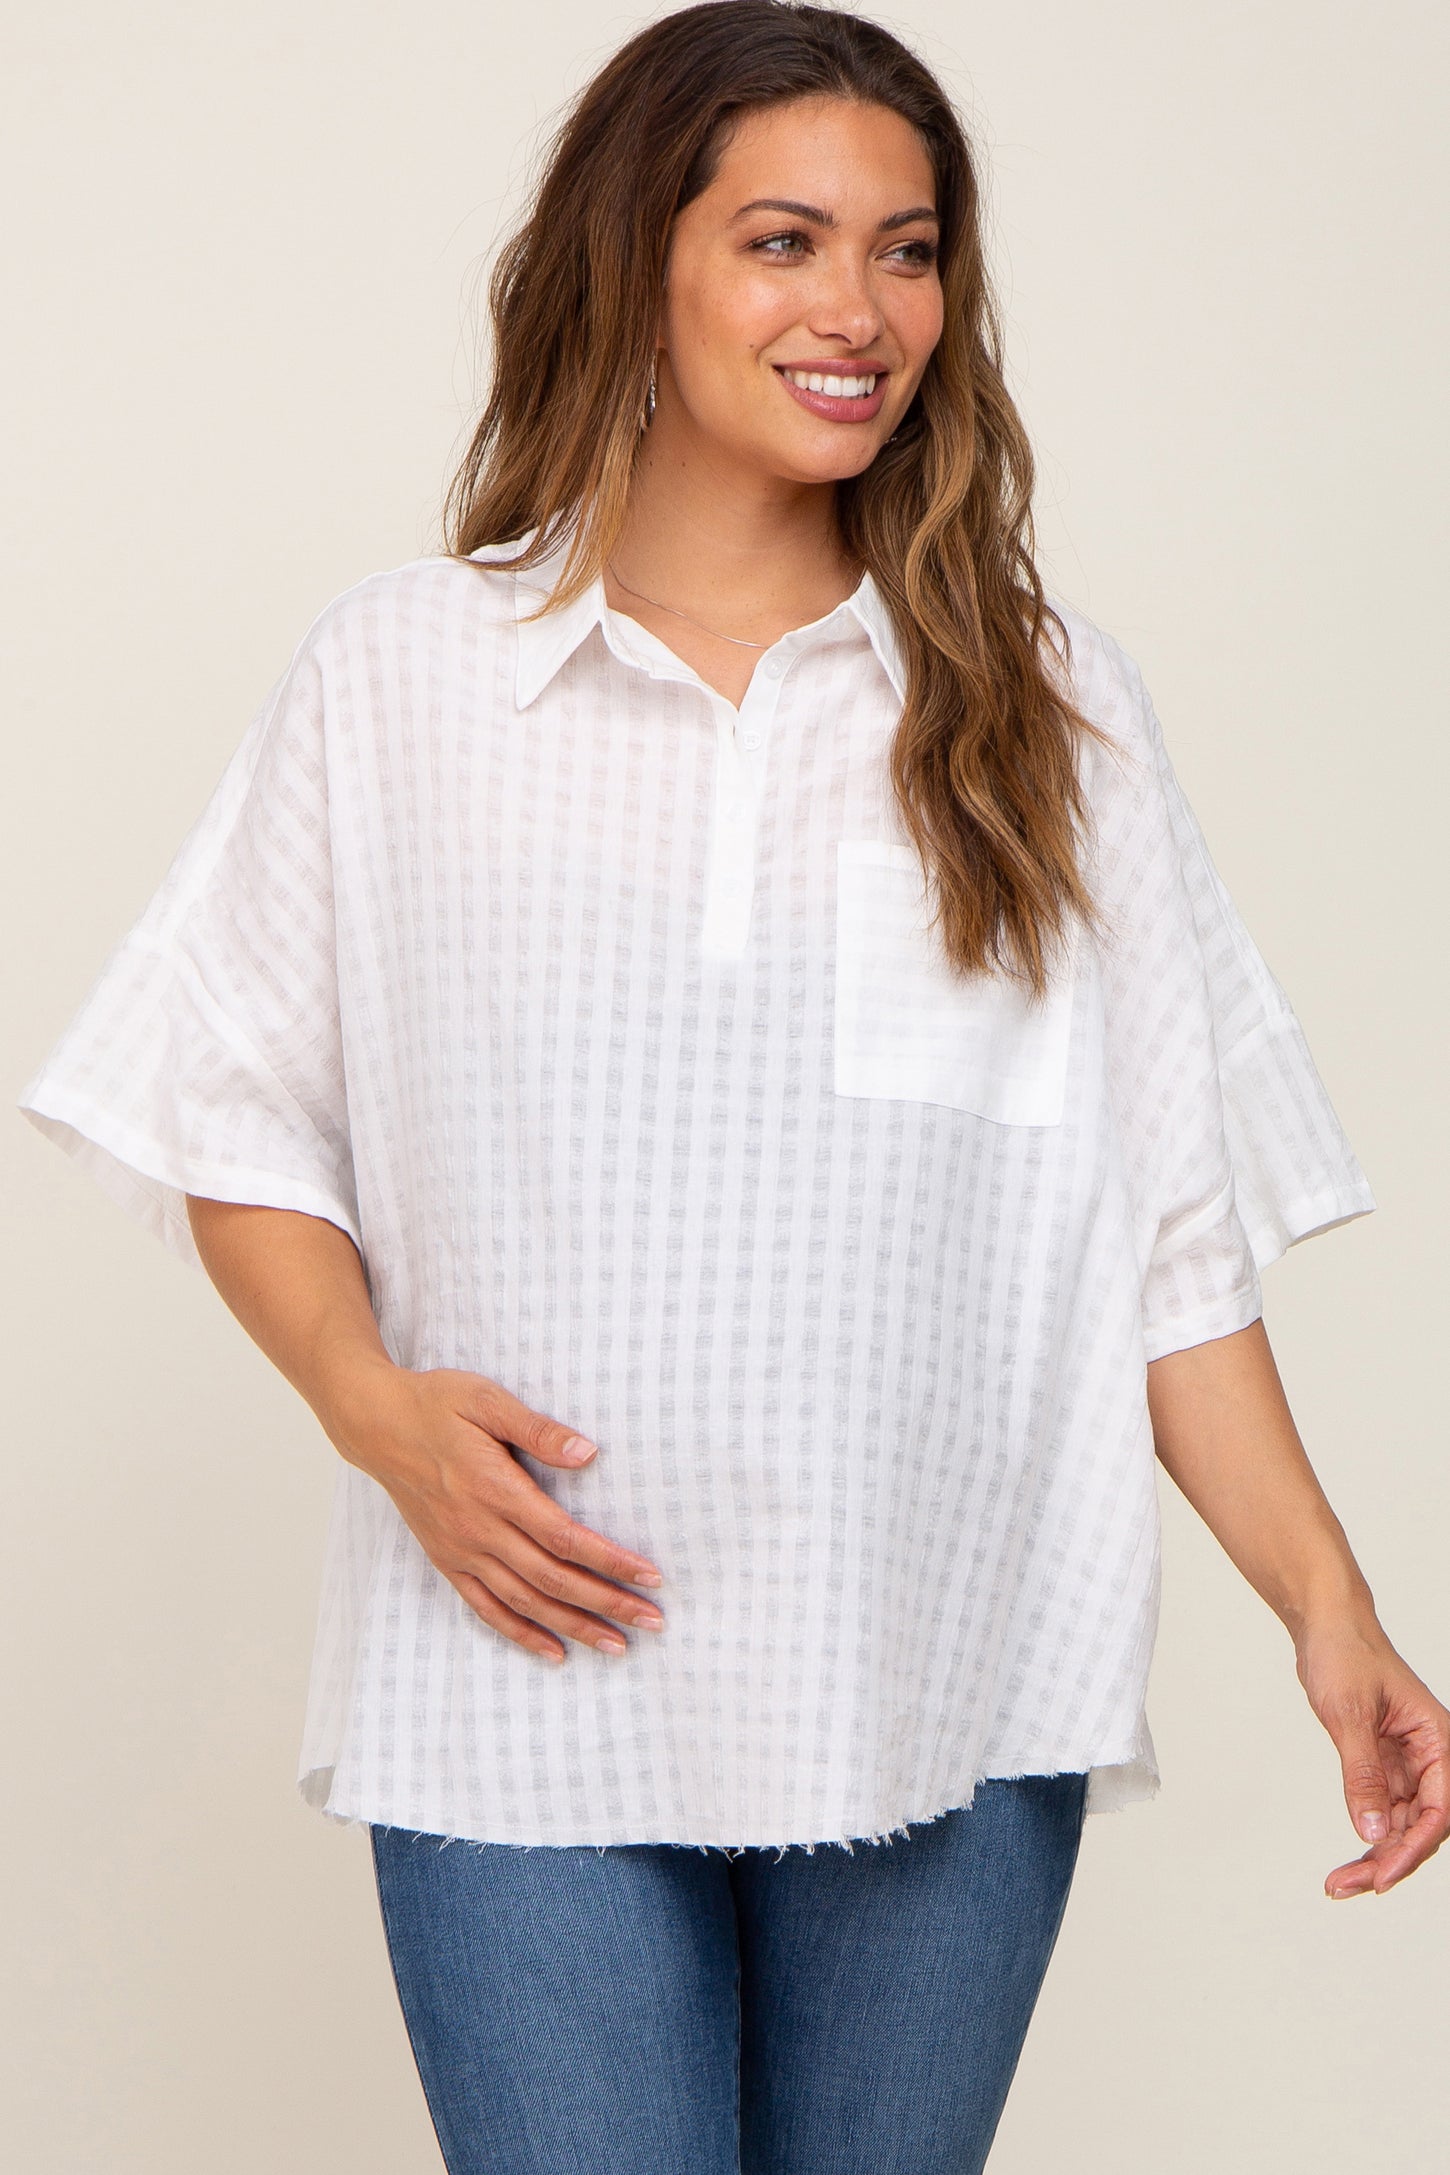 White Striped Collared Maternity Top